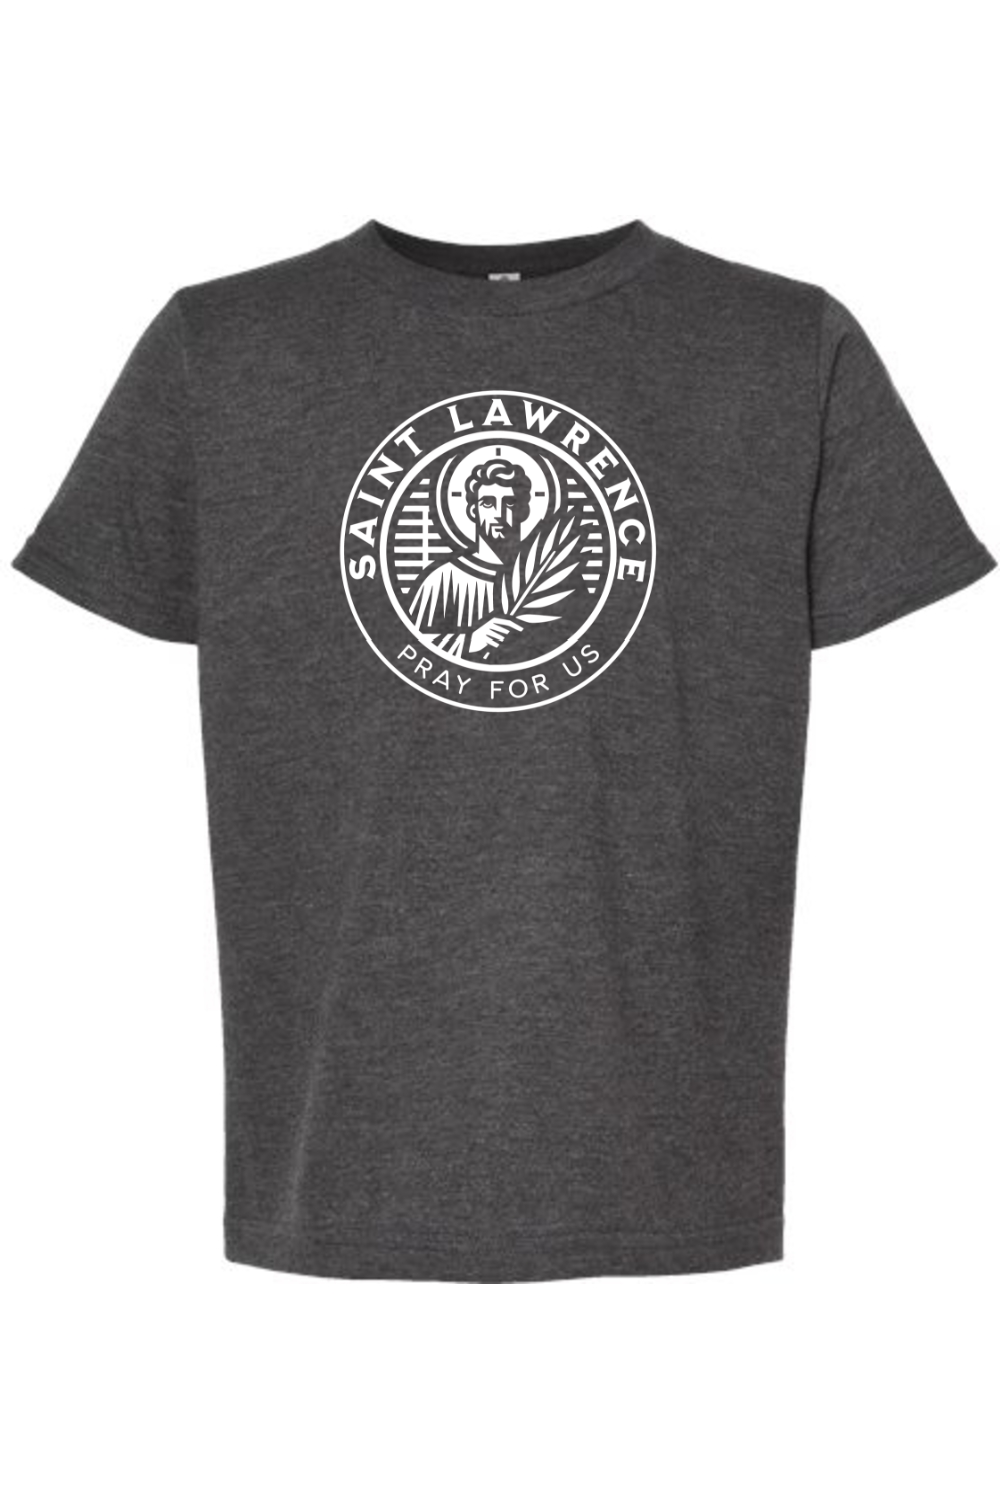 St. Lawerence - Pray for Us - Kids Tee